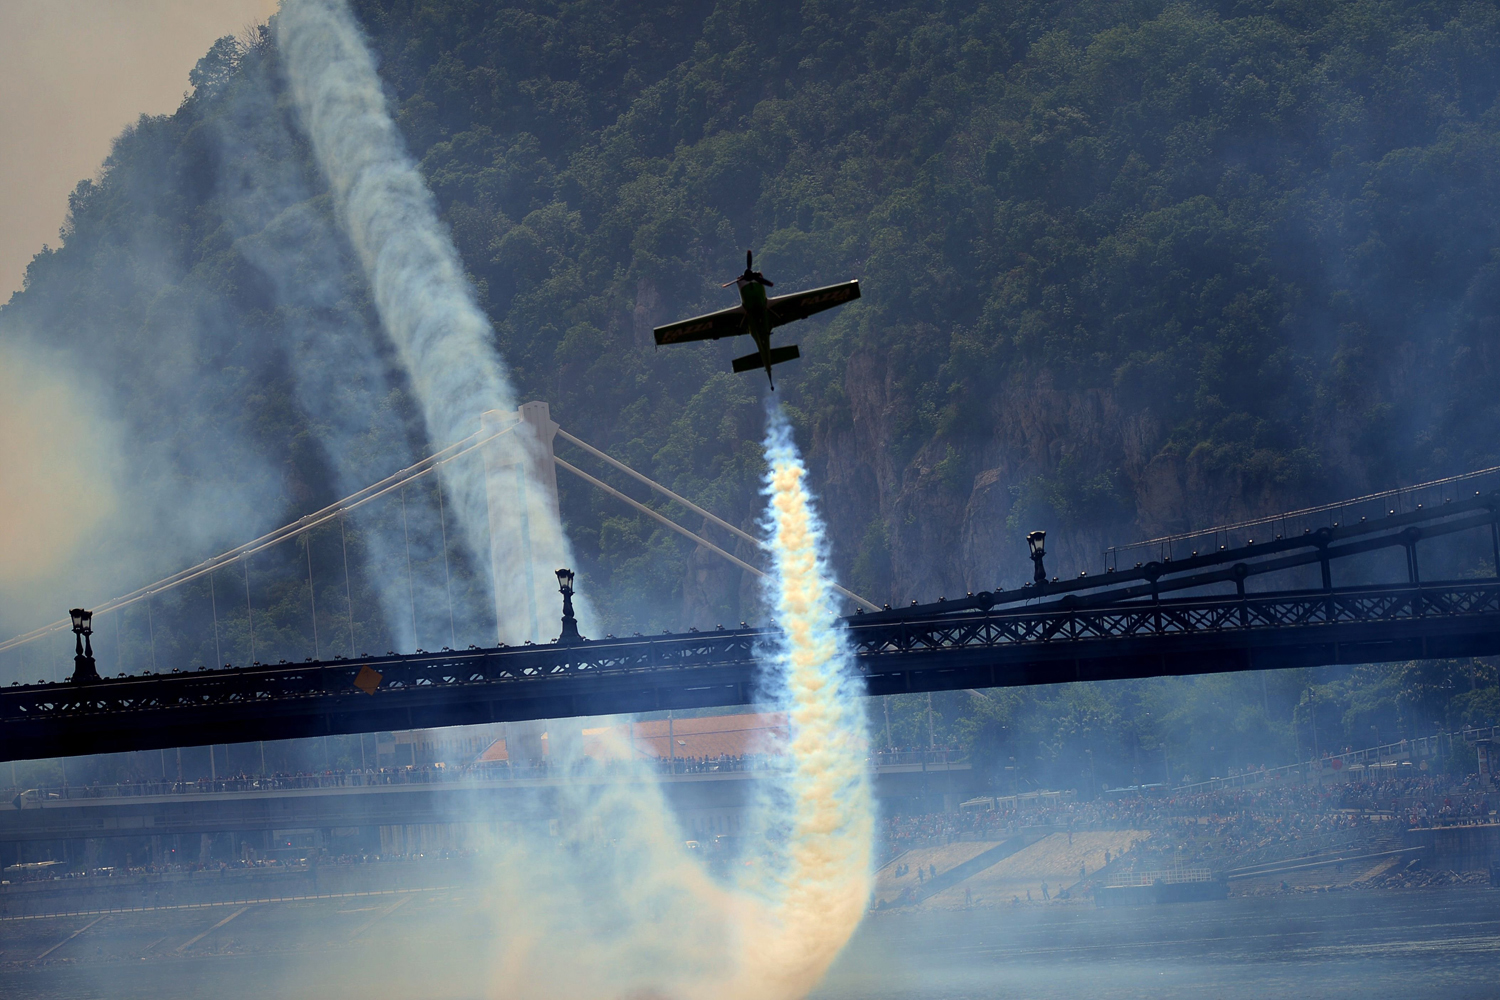 Hungarian pilot and European champion Zoltan Veres flies under the oldest Hungarian bridge, the 'Lanchid' (Chain Bridge) with his 'MXS' type plane on May 1, 2014 during a Red Bull flying and car show around the Danube River of Budapest downtown.